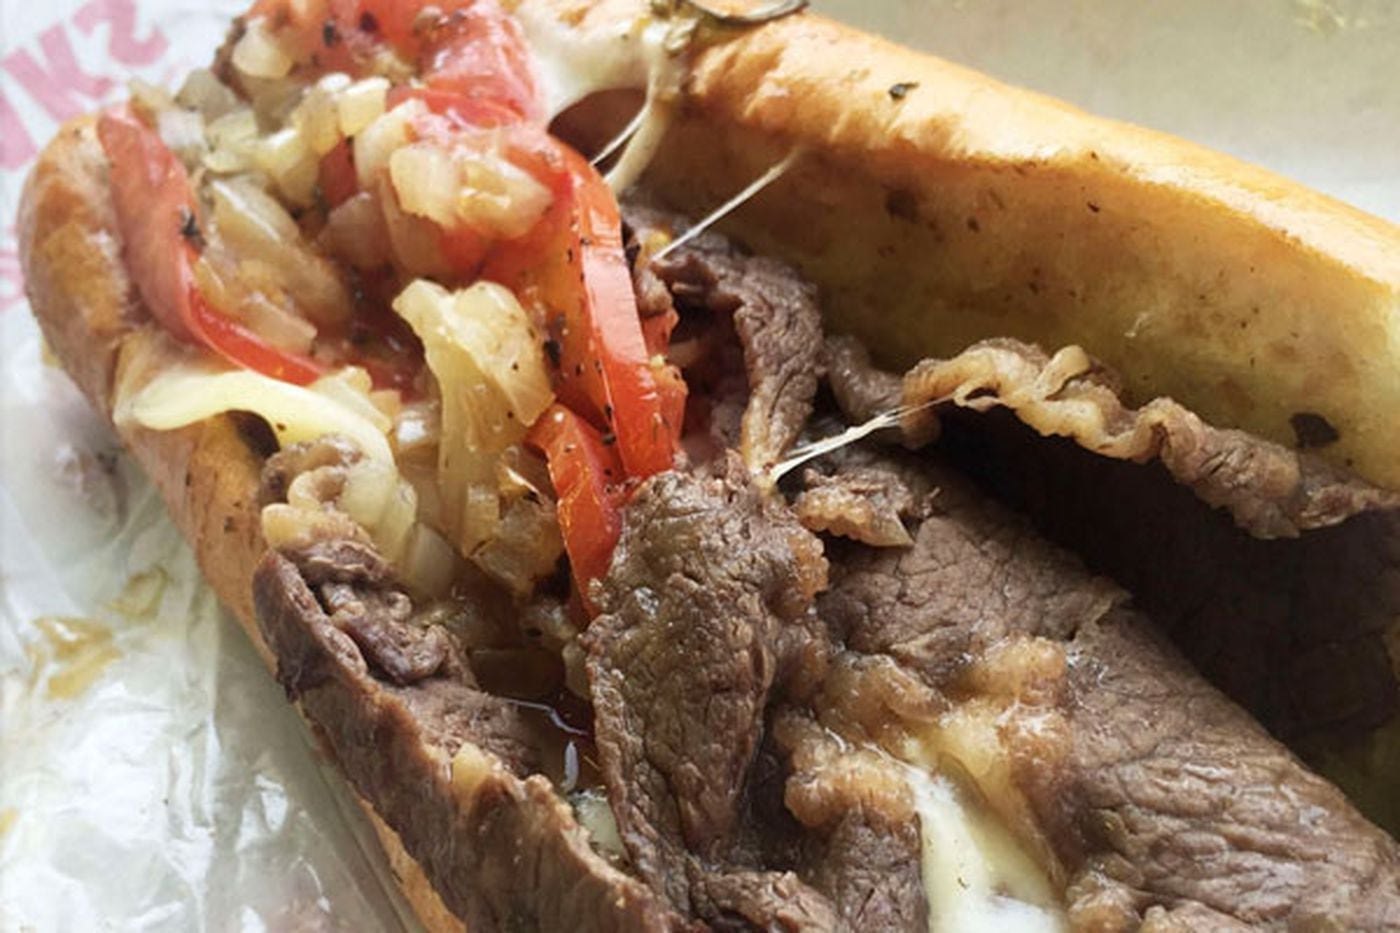 Cheesesteak with grilled tomato, onions, provolone, and a long hot from Philip's Steaks (2234 W Passyunk Ave.).